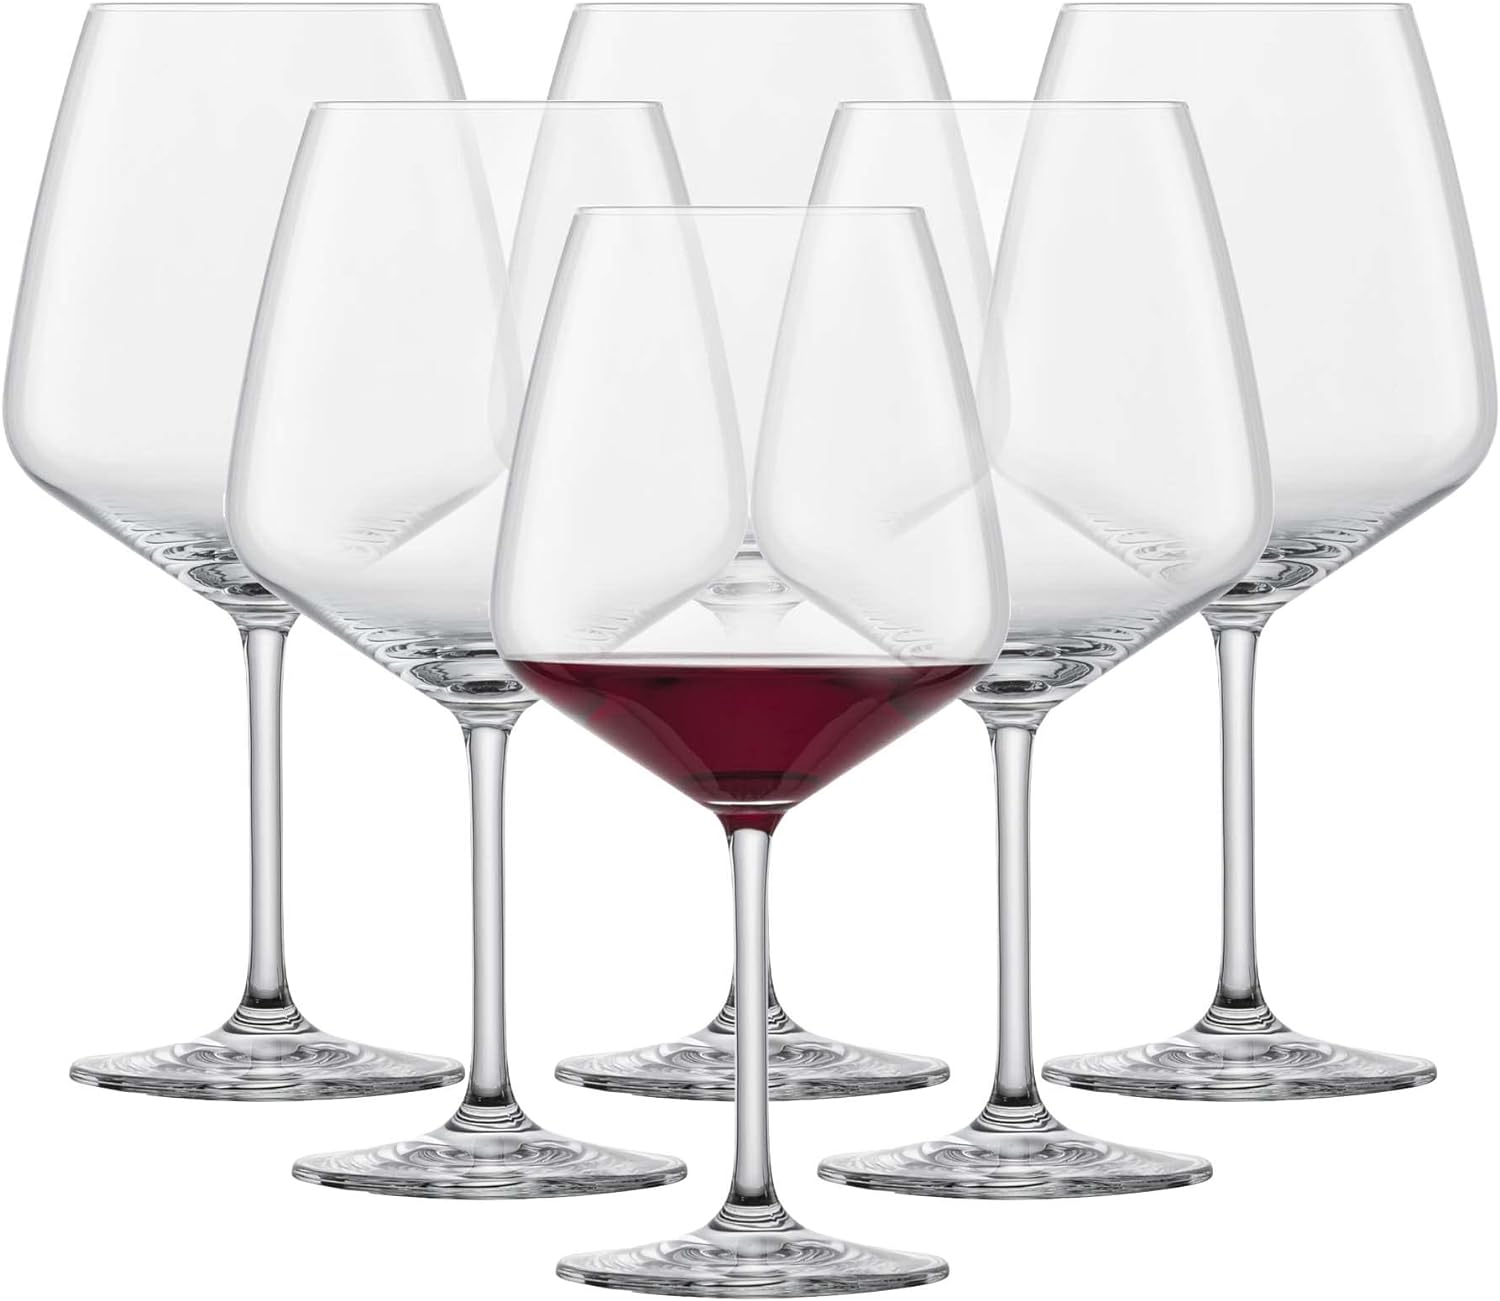 Schott Zwiesel Burgundian red wine glass button (6-Set), bulbous burgundy glasses for red wine, dishwasher-proof Tritan® crystal glasses, made in Germany (item no. 115673)